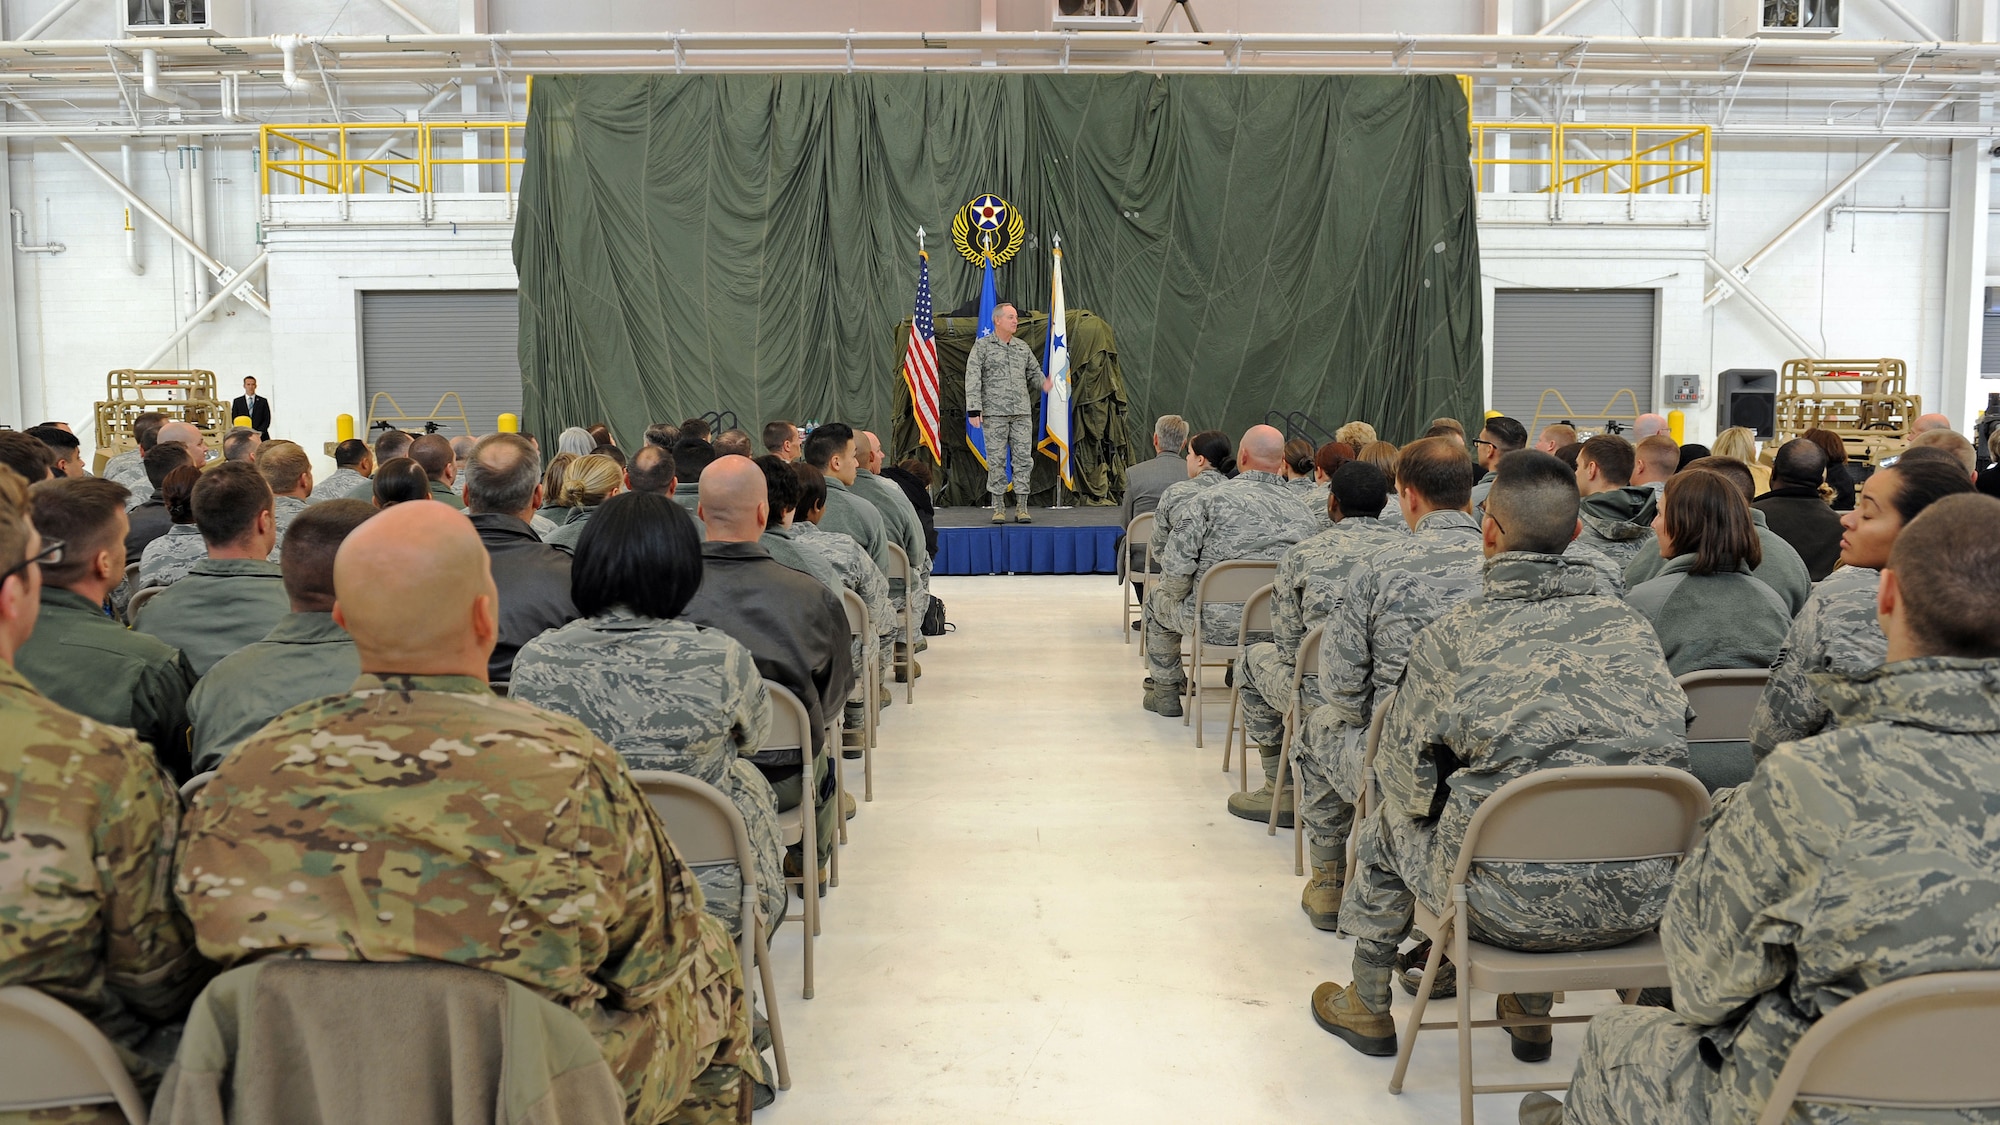 Air Force Chief of Staff Gen. Mark A. Welsh III addresses air commandos and local leadership during an all call Nov. 17, 2015, at Cannon Air Force Base, N.M. Welsh spoke about the value of communication, common sense and caring for one another, and fielded questions pertaining to foreign policy and the future of the remotely piloted aircraft community. (U.S. Air Force photo/Staff Sgt. Whitney Amstutz)